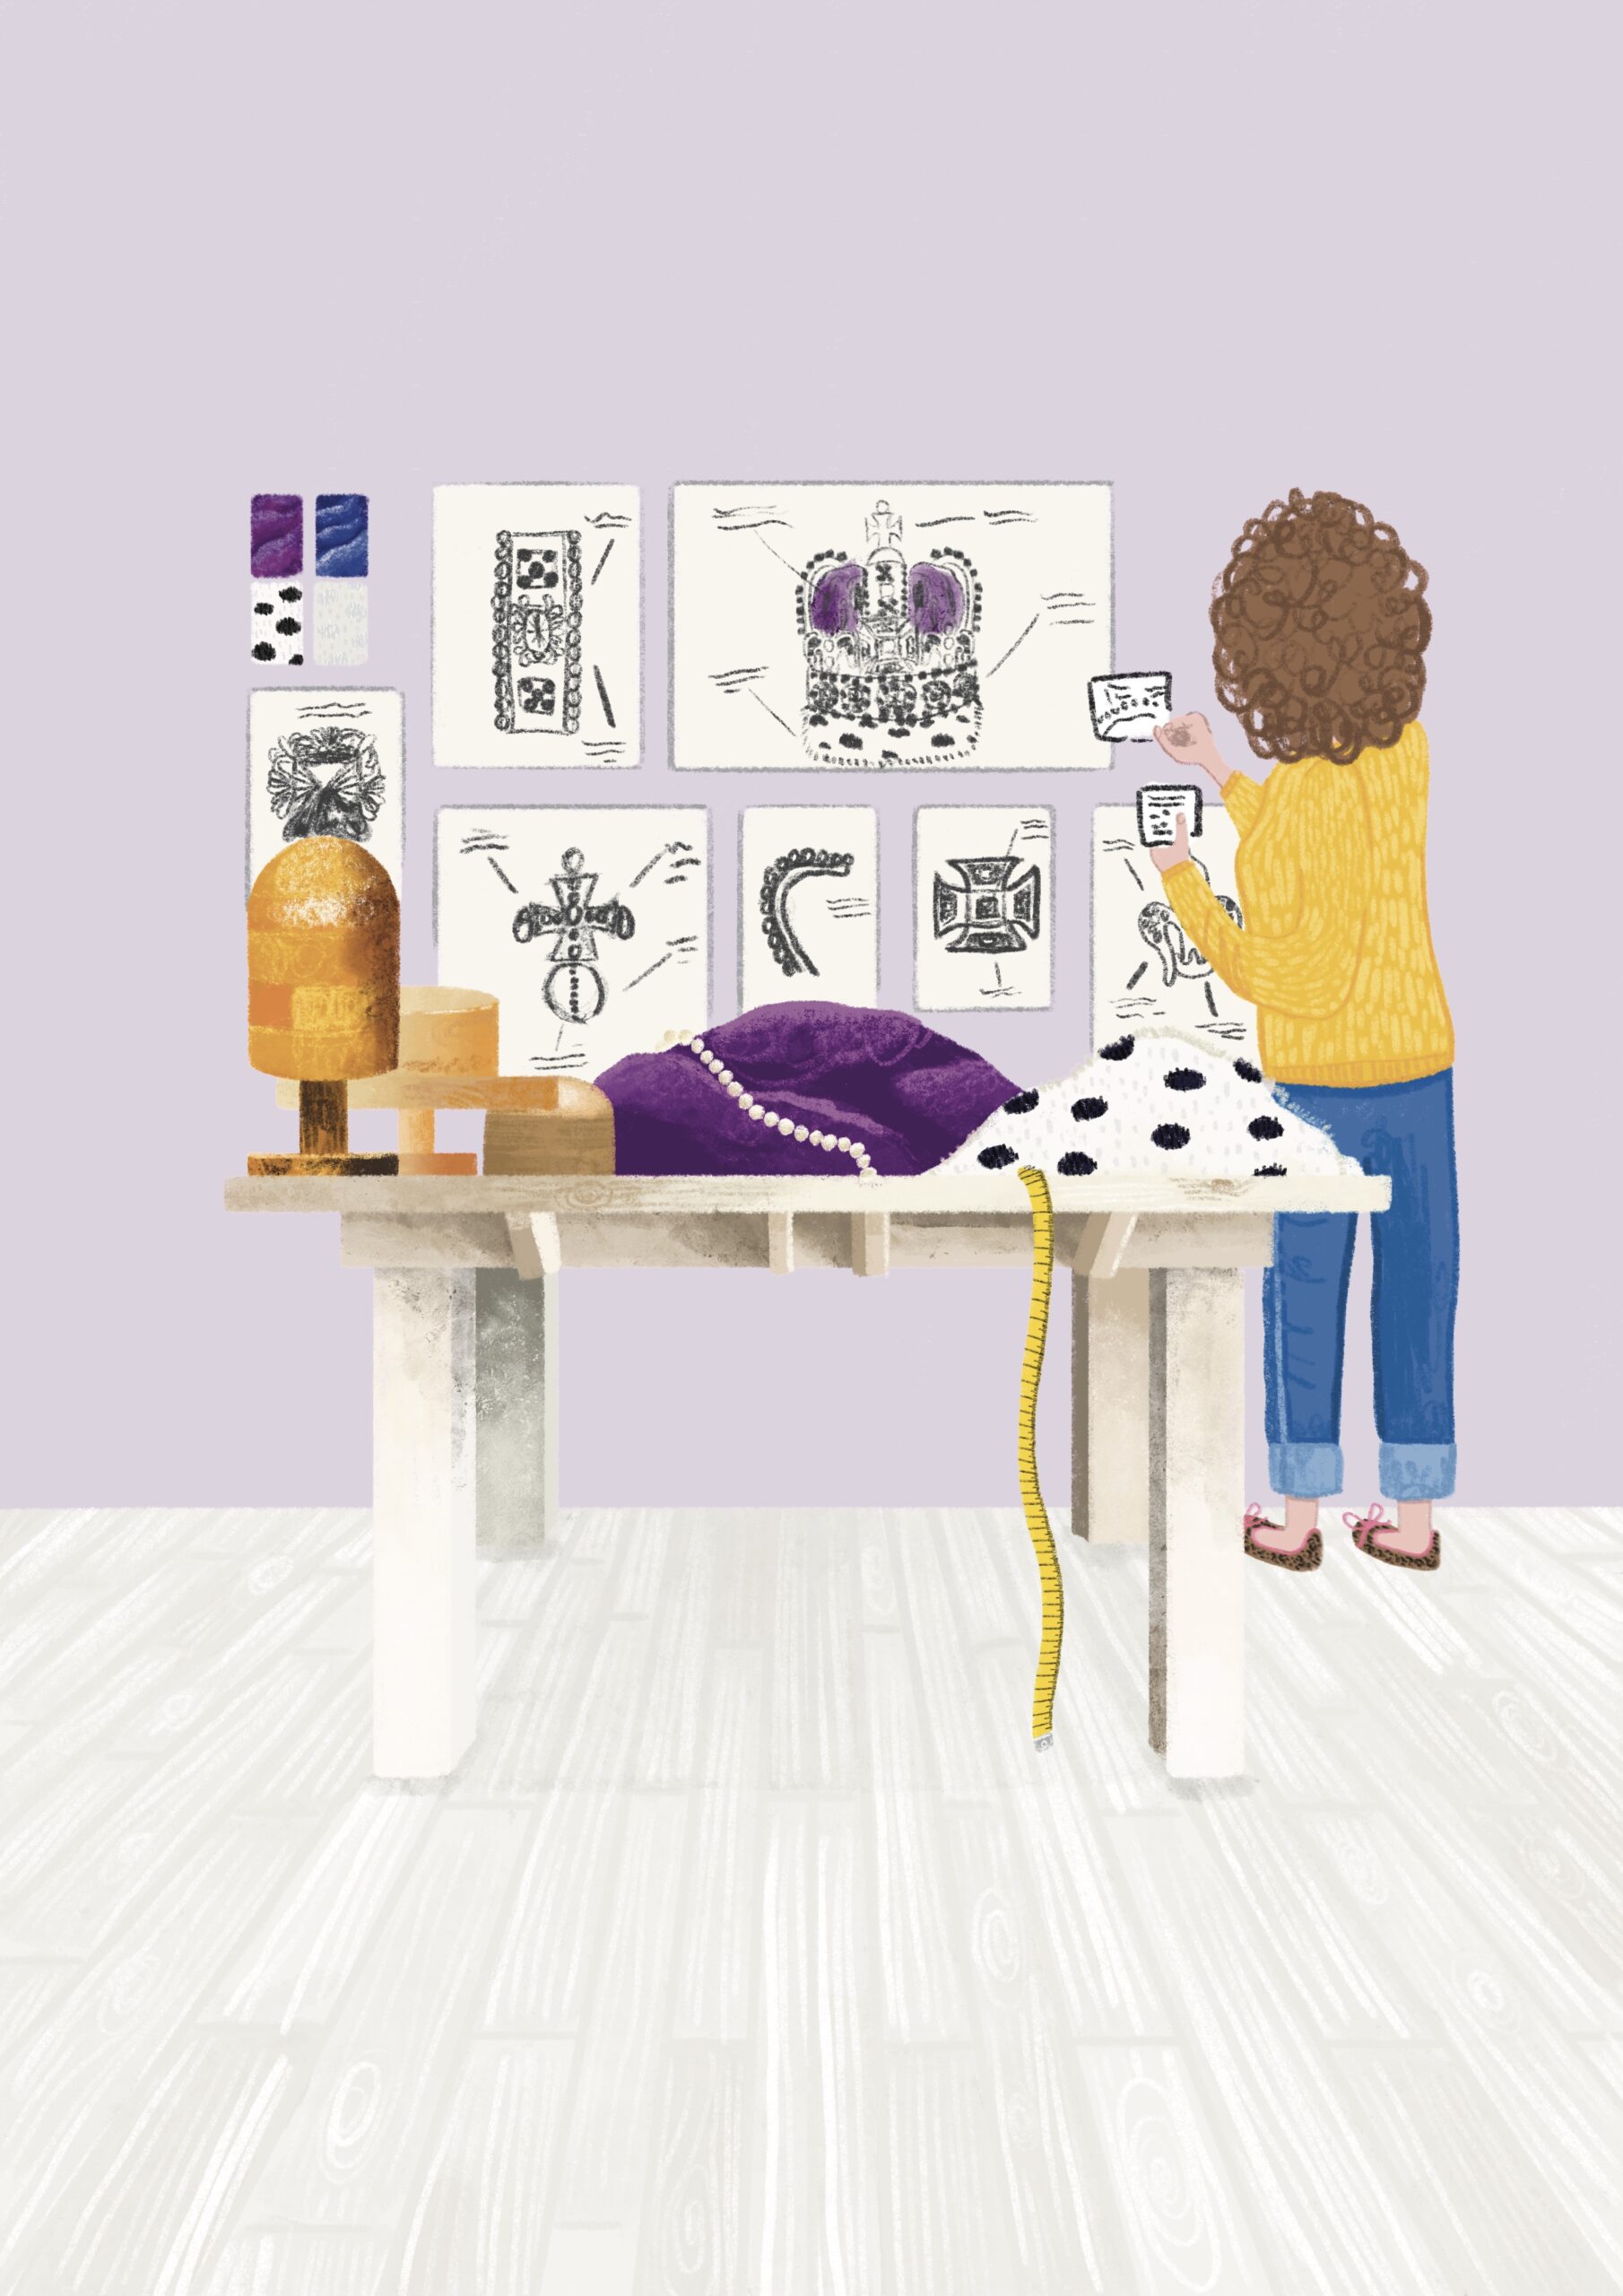 An illustration done by Hope Bullen with a lady facing her back to us whilst looking at a crown mood board on a lilac wall. In front of her is a table that has materials and hat blocks that represent the makings of the late Queen's crown jewels.